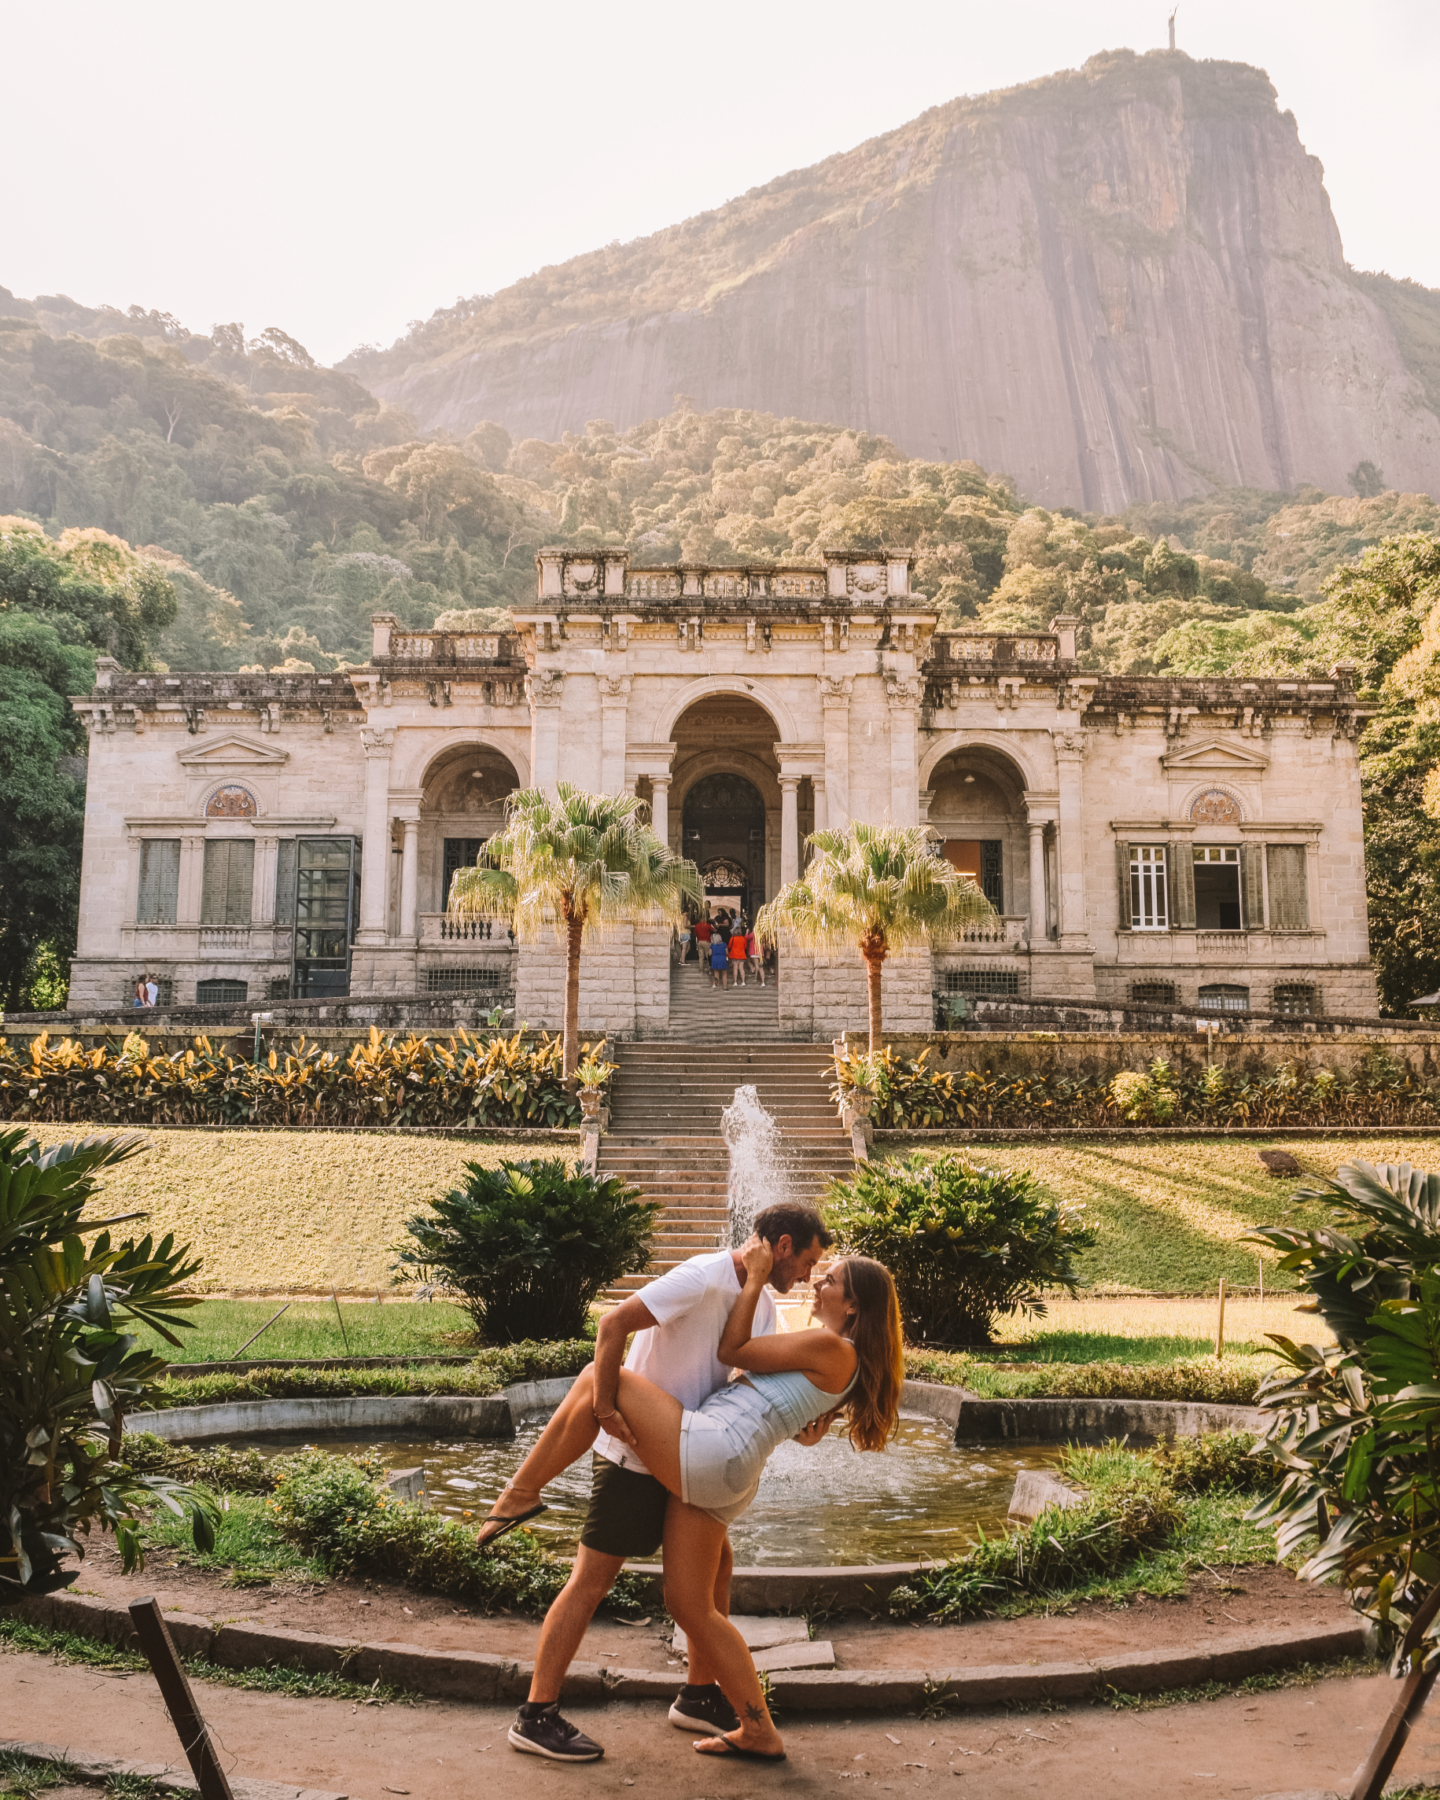 The Perfect 2 Weeks in Brazil Itinerary - What to see in Rio de Janeiro